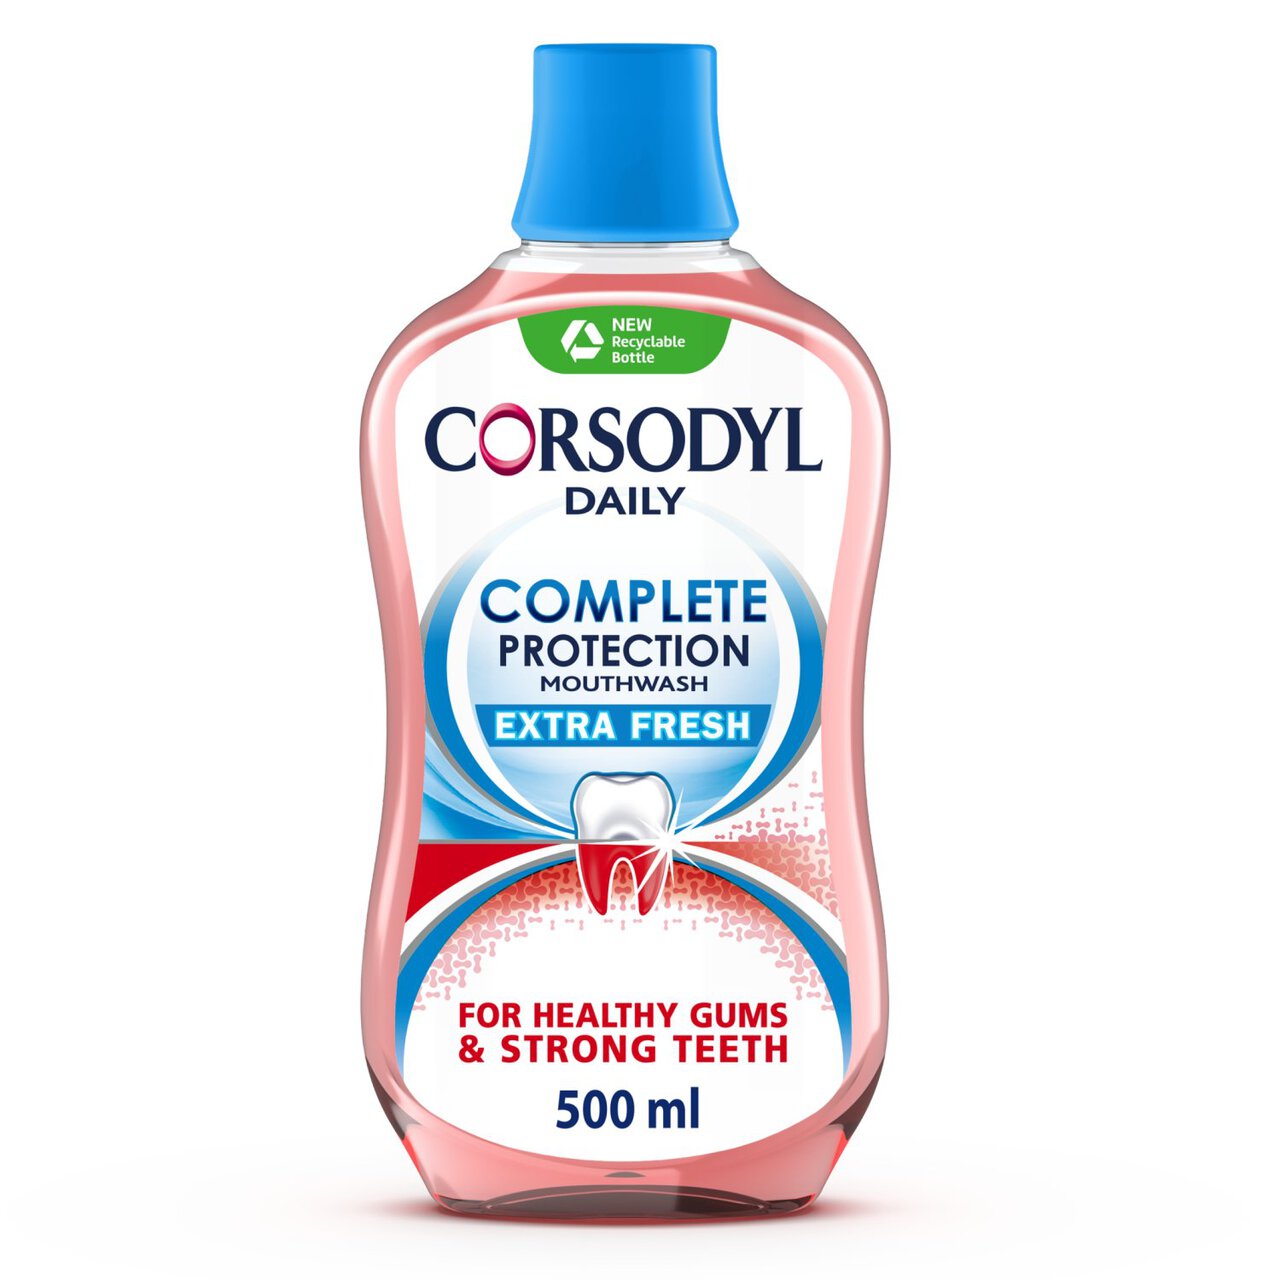 Corsodyl Gum Mouthwash Complete Protection Extra Fresh 500ml 500ml